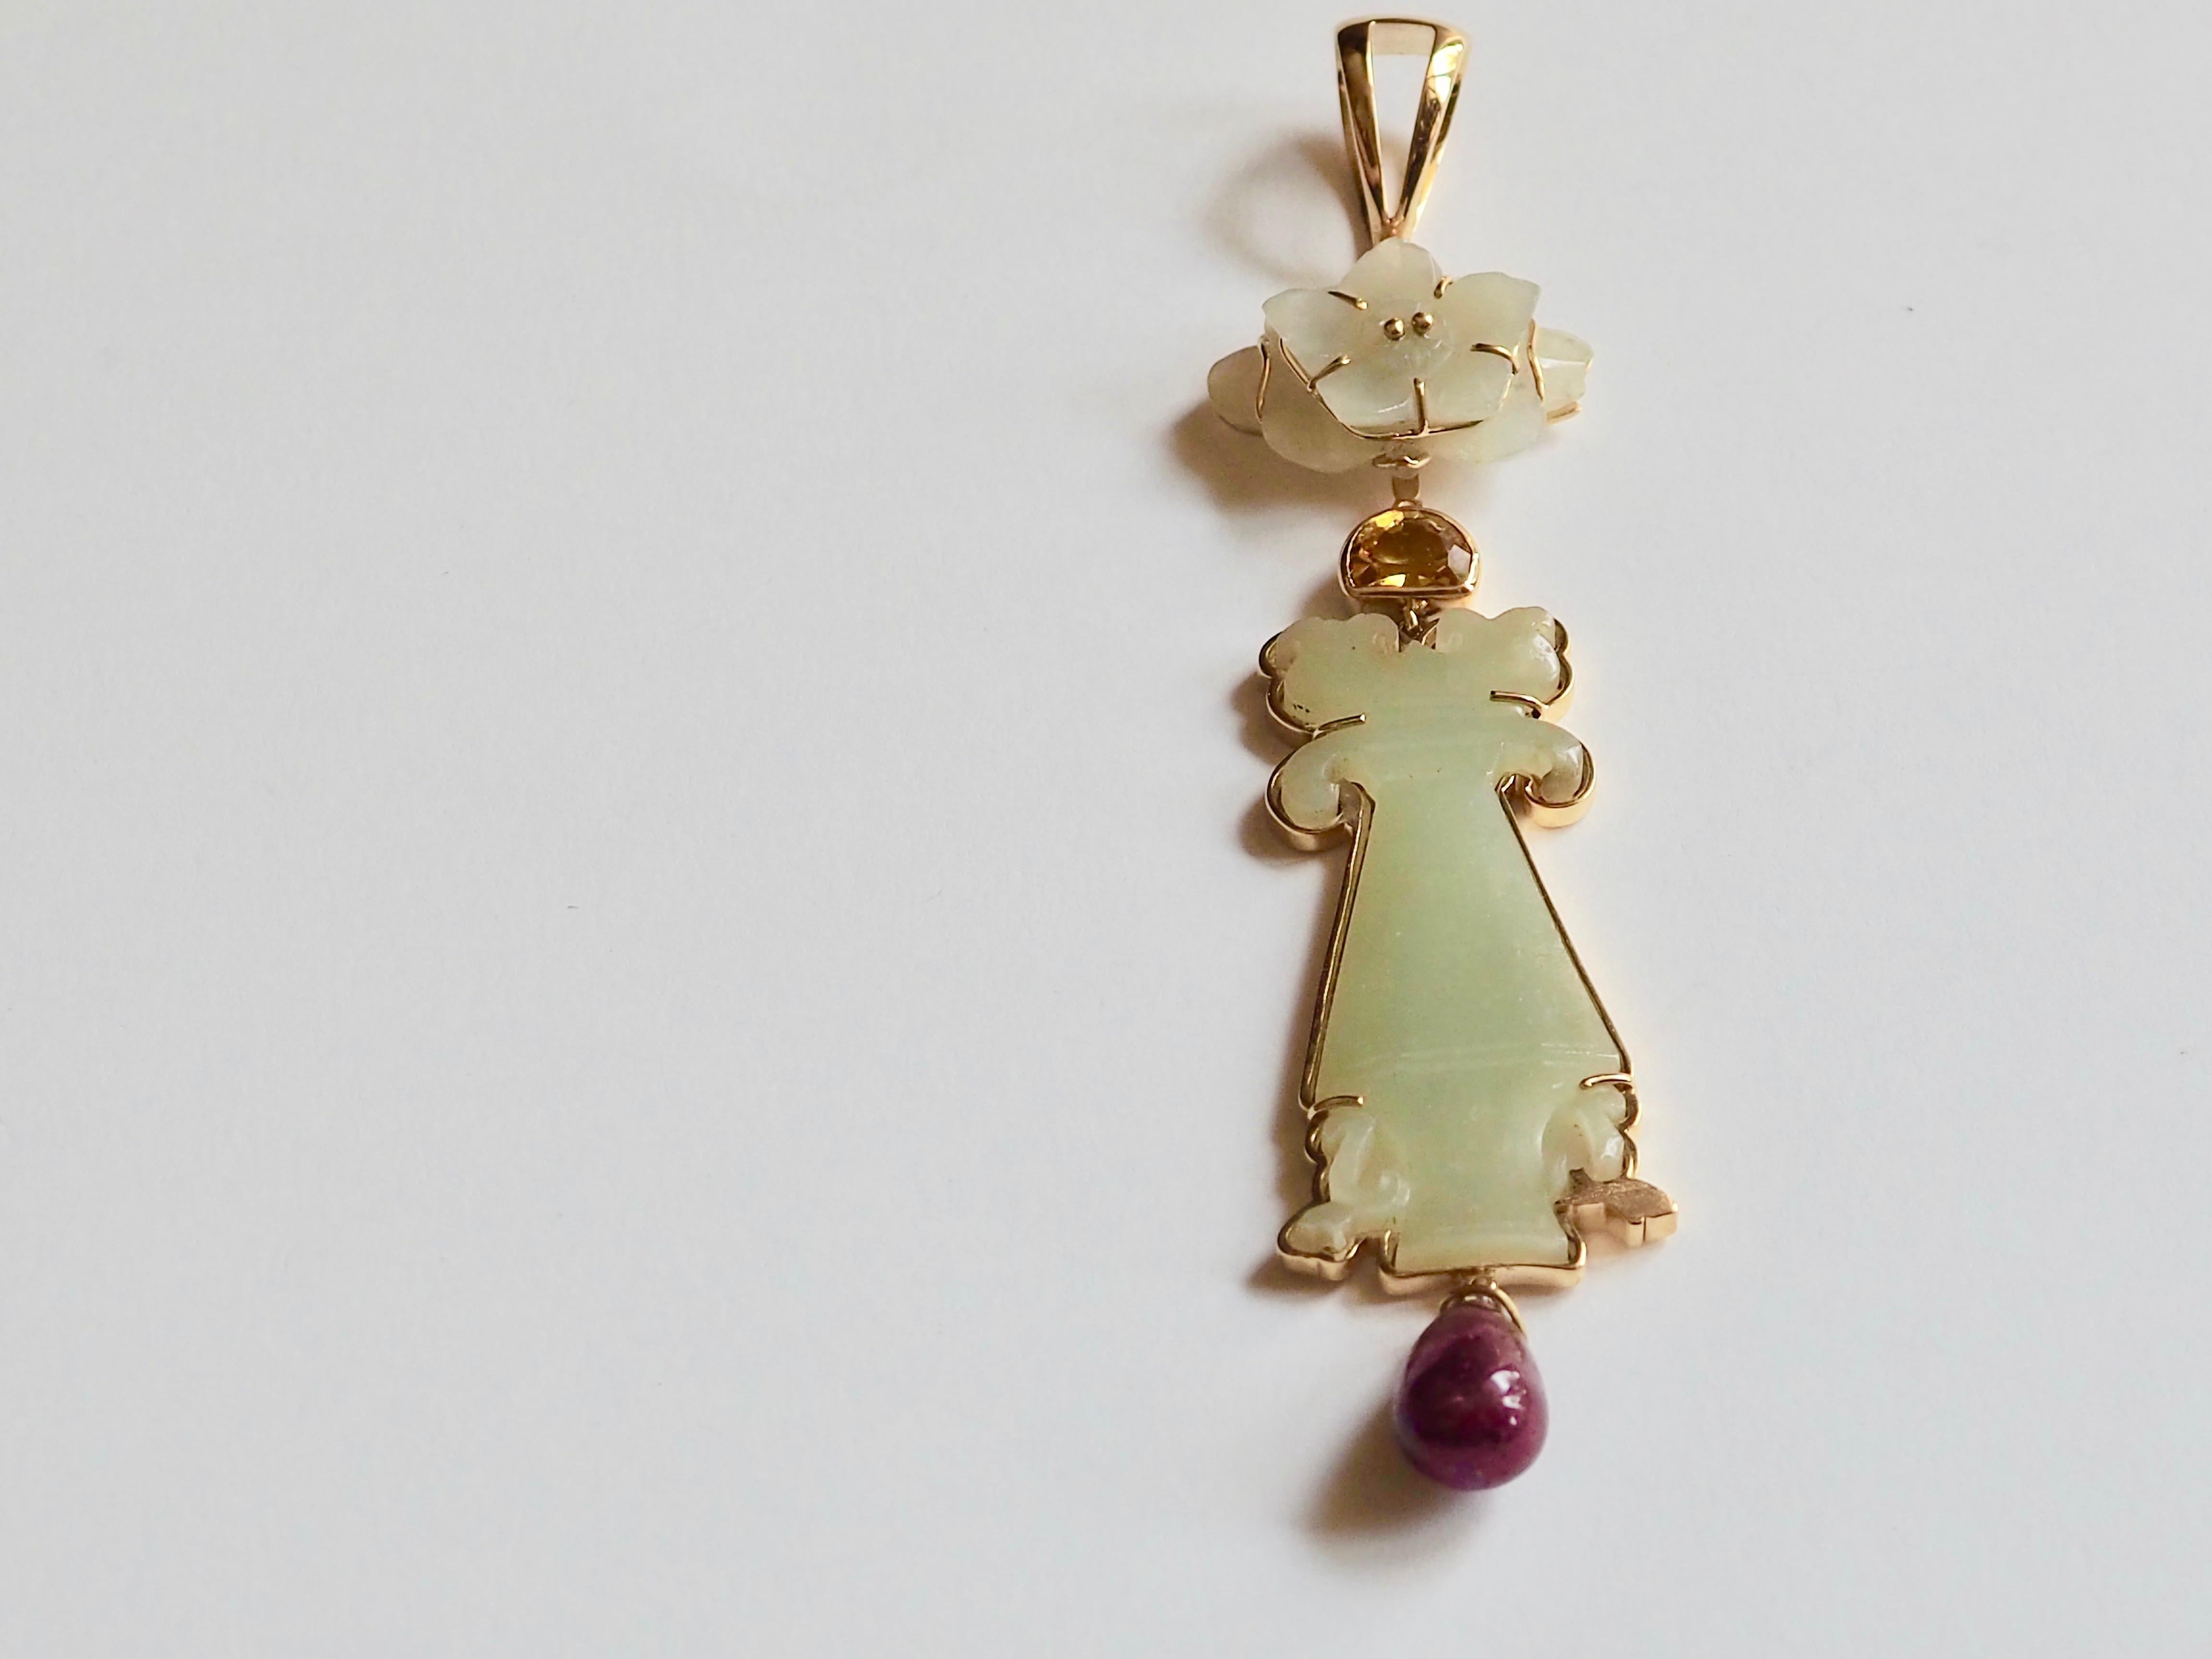 Pendant with old Chinese carved imperial jade, citrine, ruby drop, gold.
Total length 11cm.
All jewelry is new and has never been previously owned or worn. Each item will arrive at your door beautifully gift wrapped in boxes, put inside an elegant